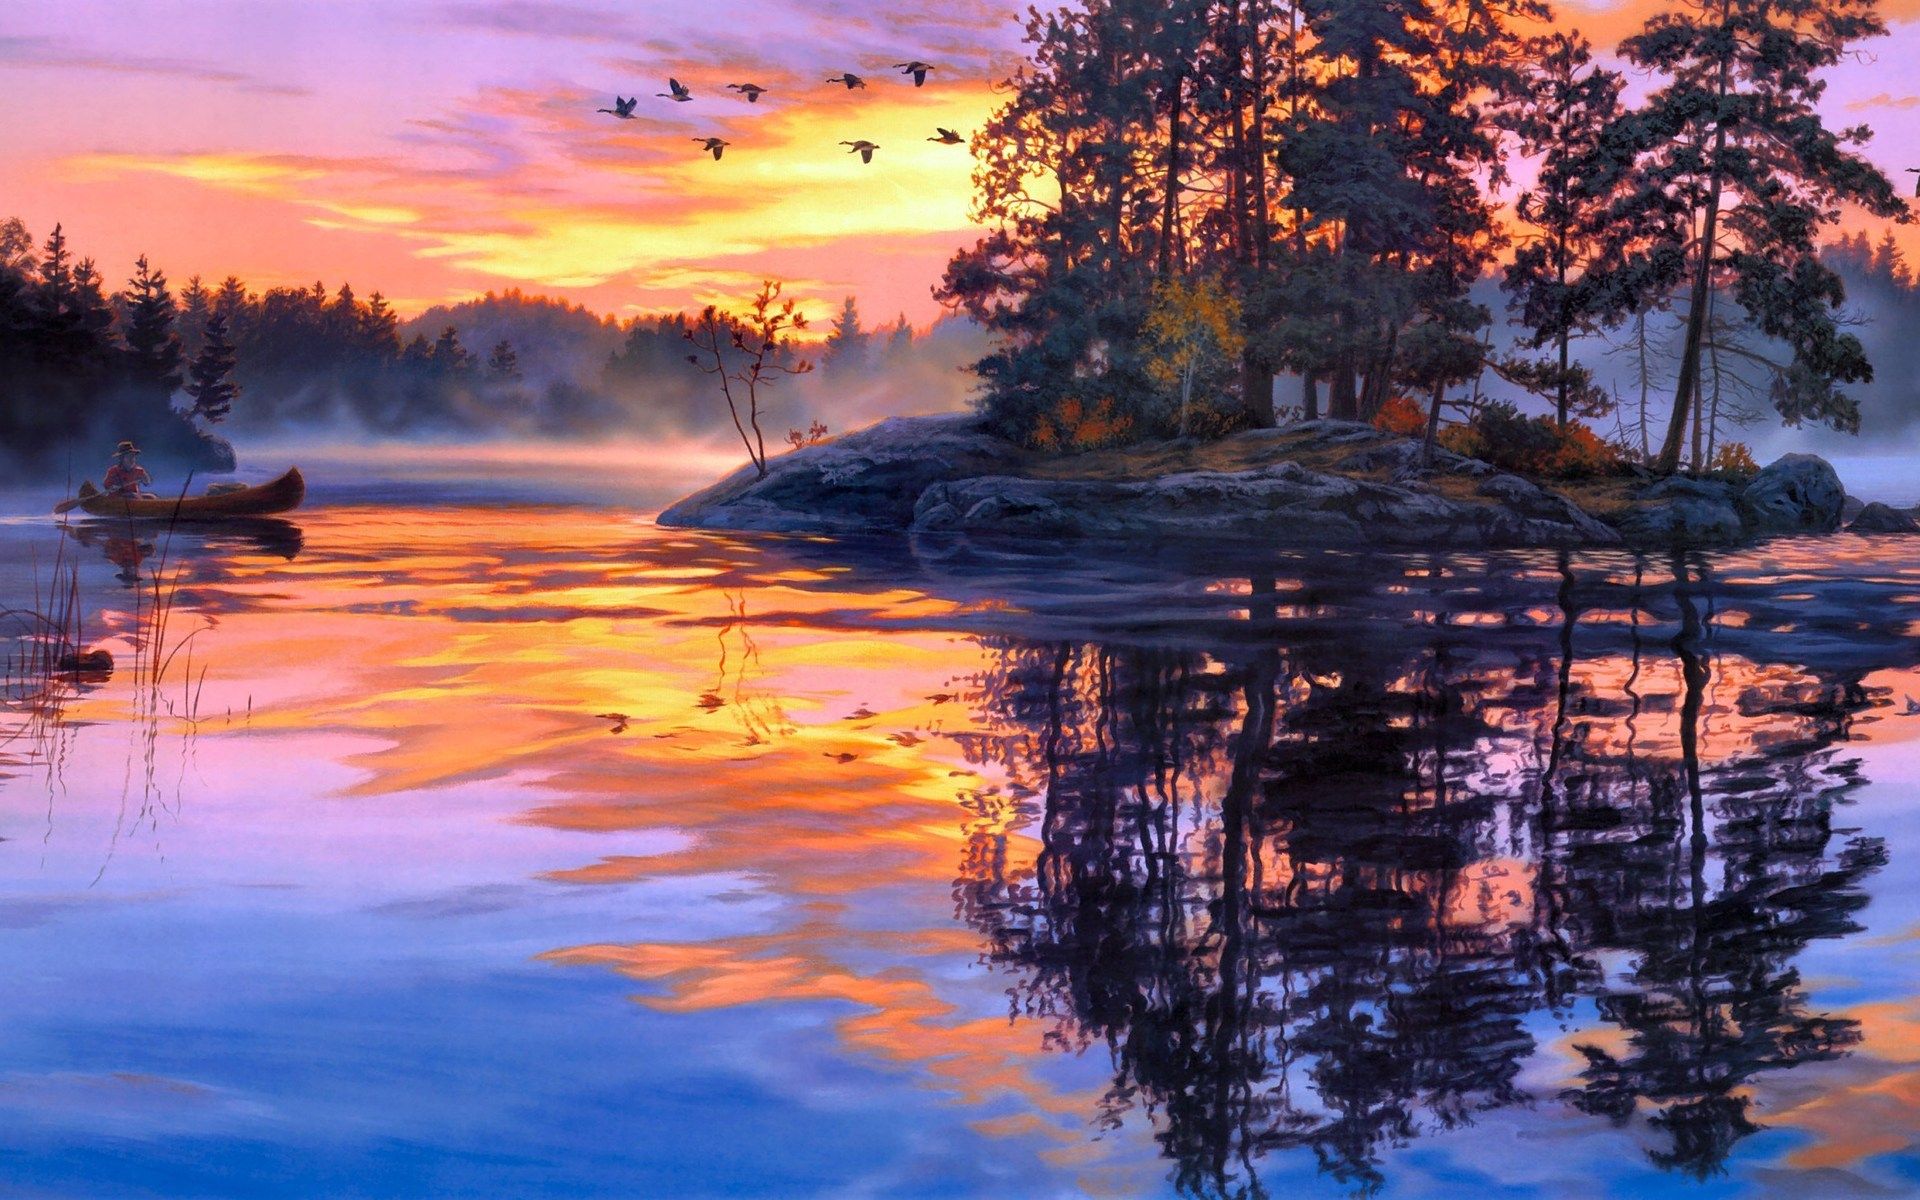 Sunset Water Reflection Painting - HD Wallpaper 